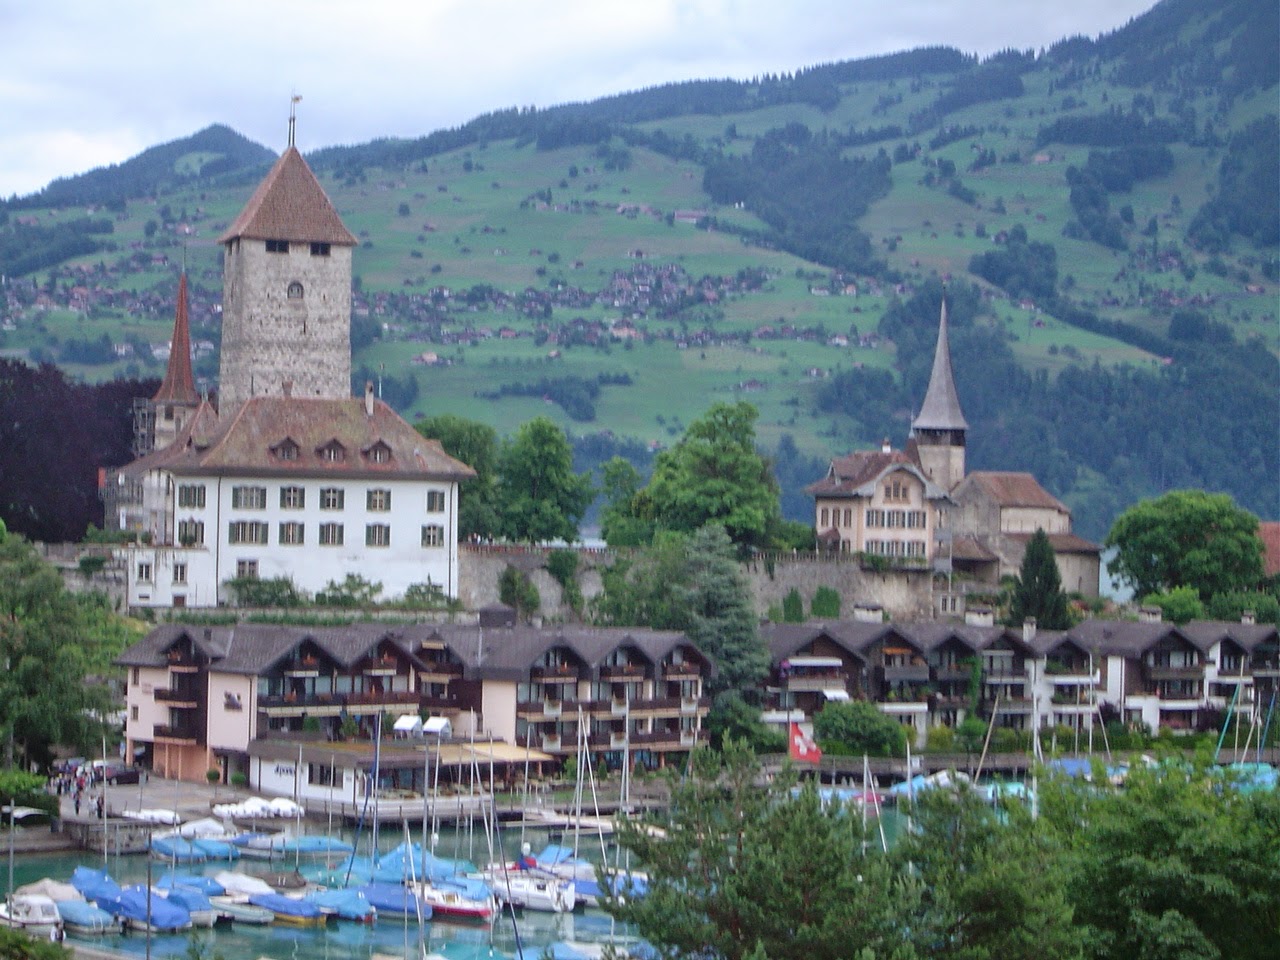 All About Royal Families: Happy Sunday Picture - Spiez - Switzerland